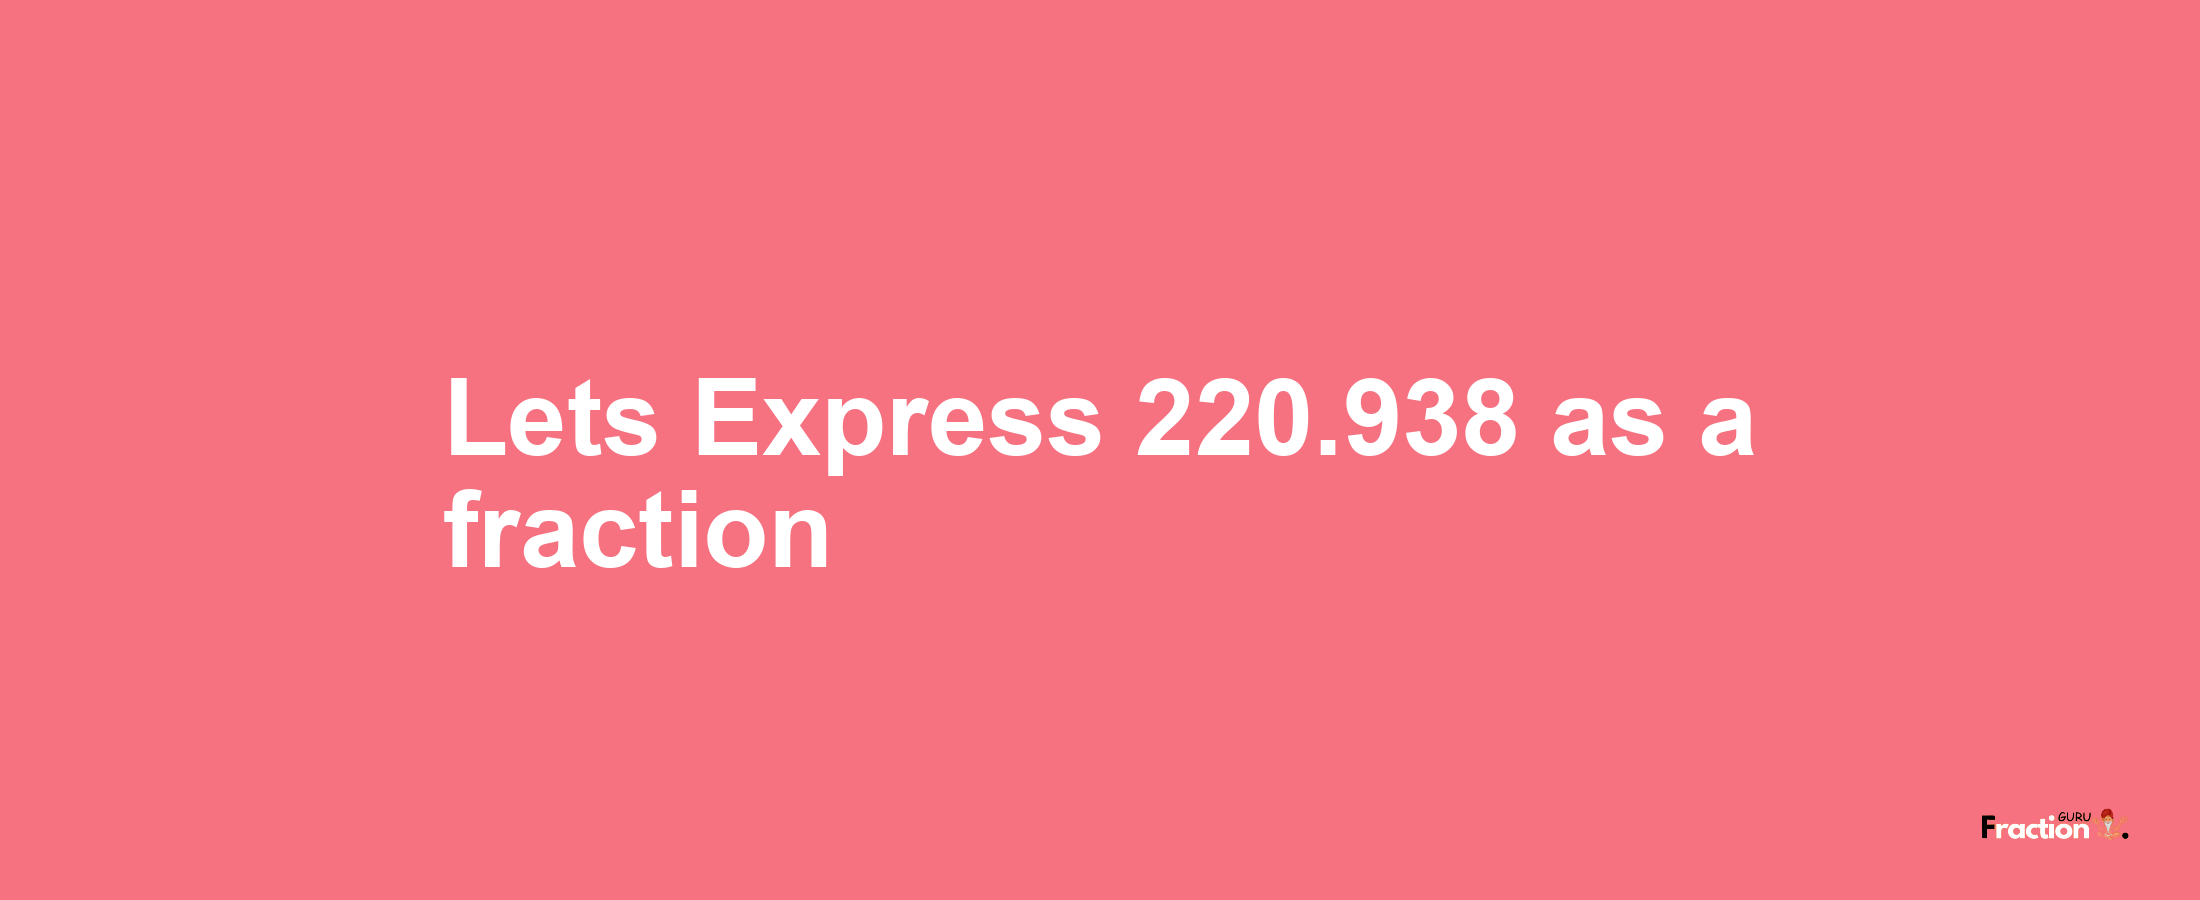 Lets Express 220.938 as afraction